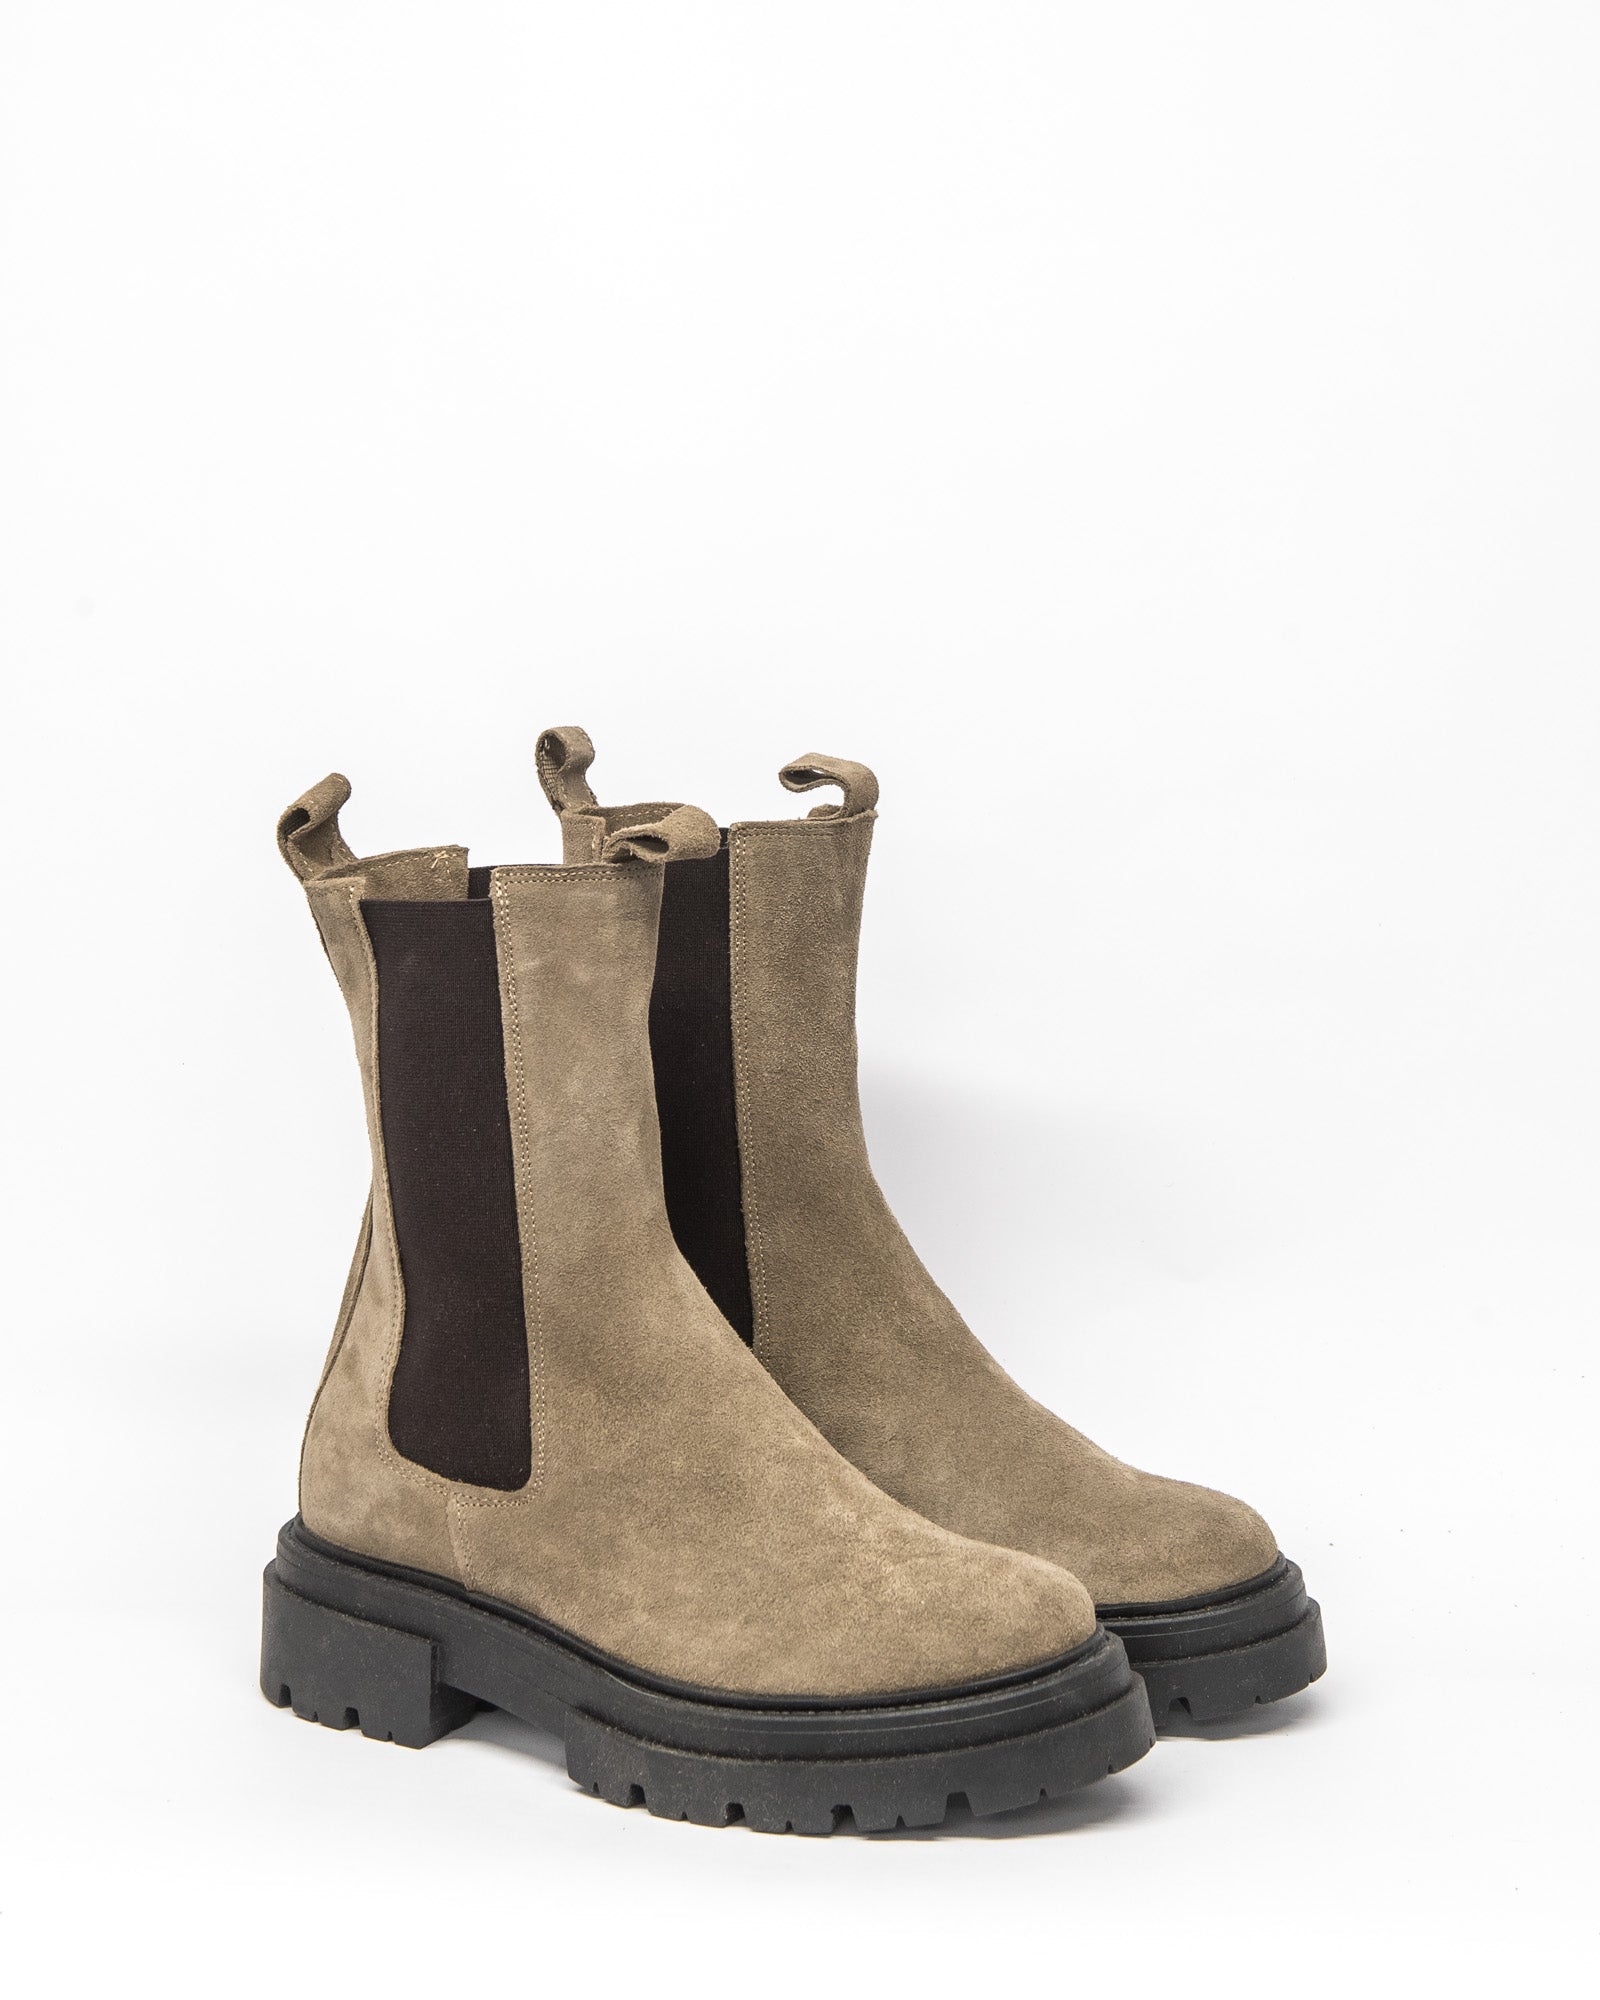 derive boot - taupe suede